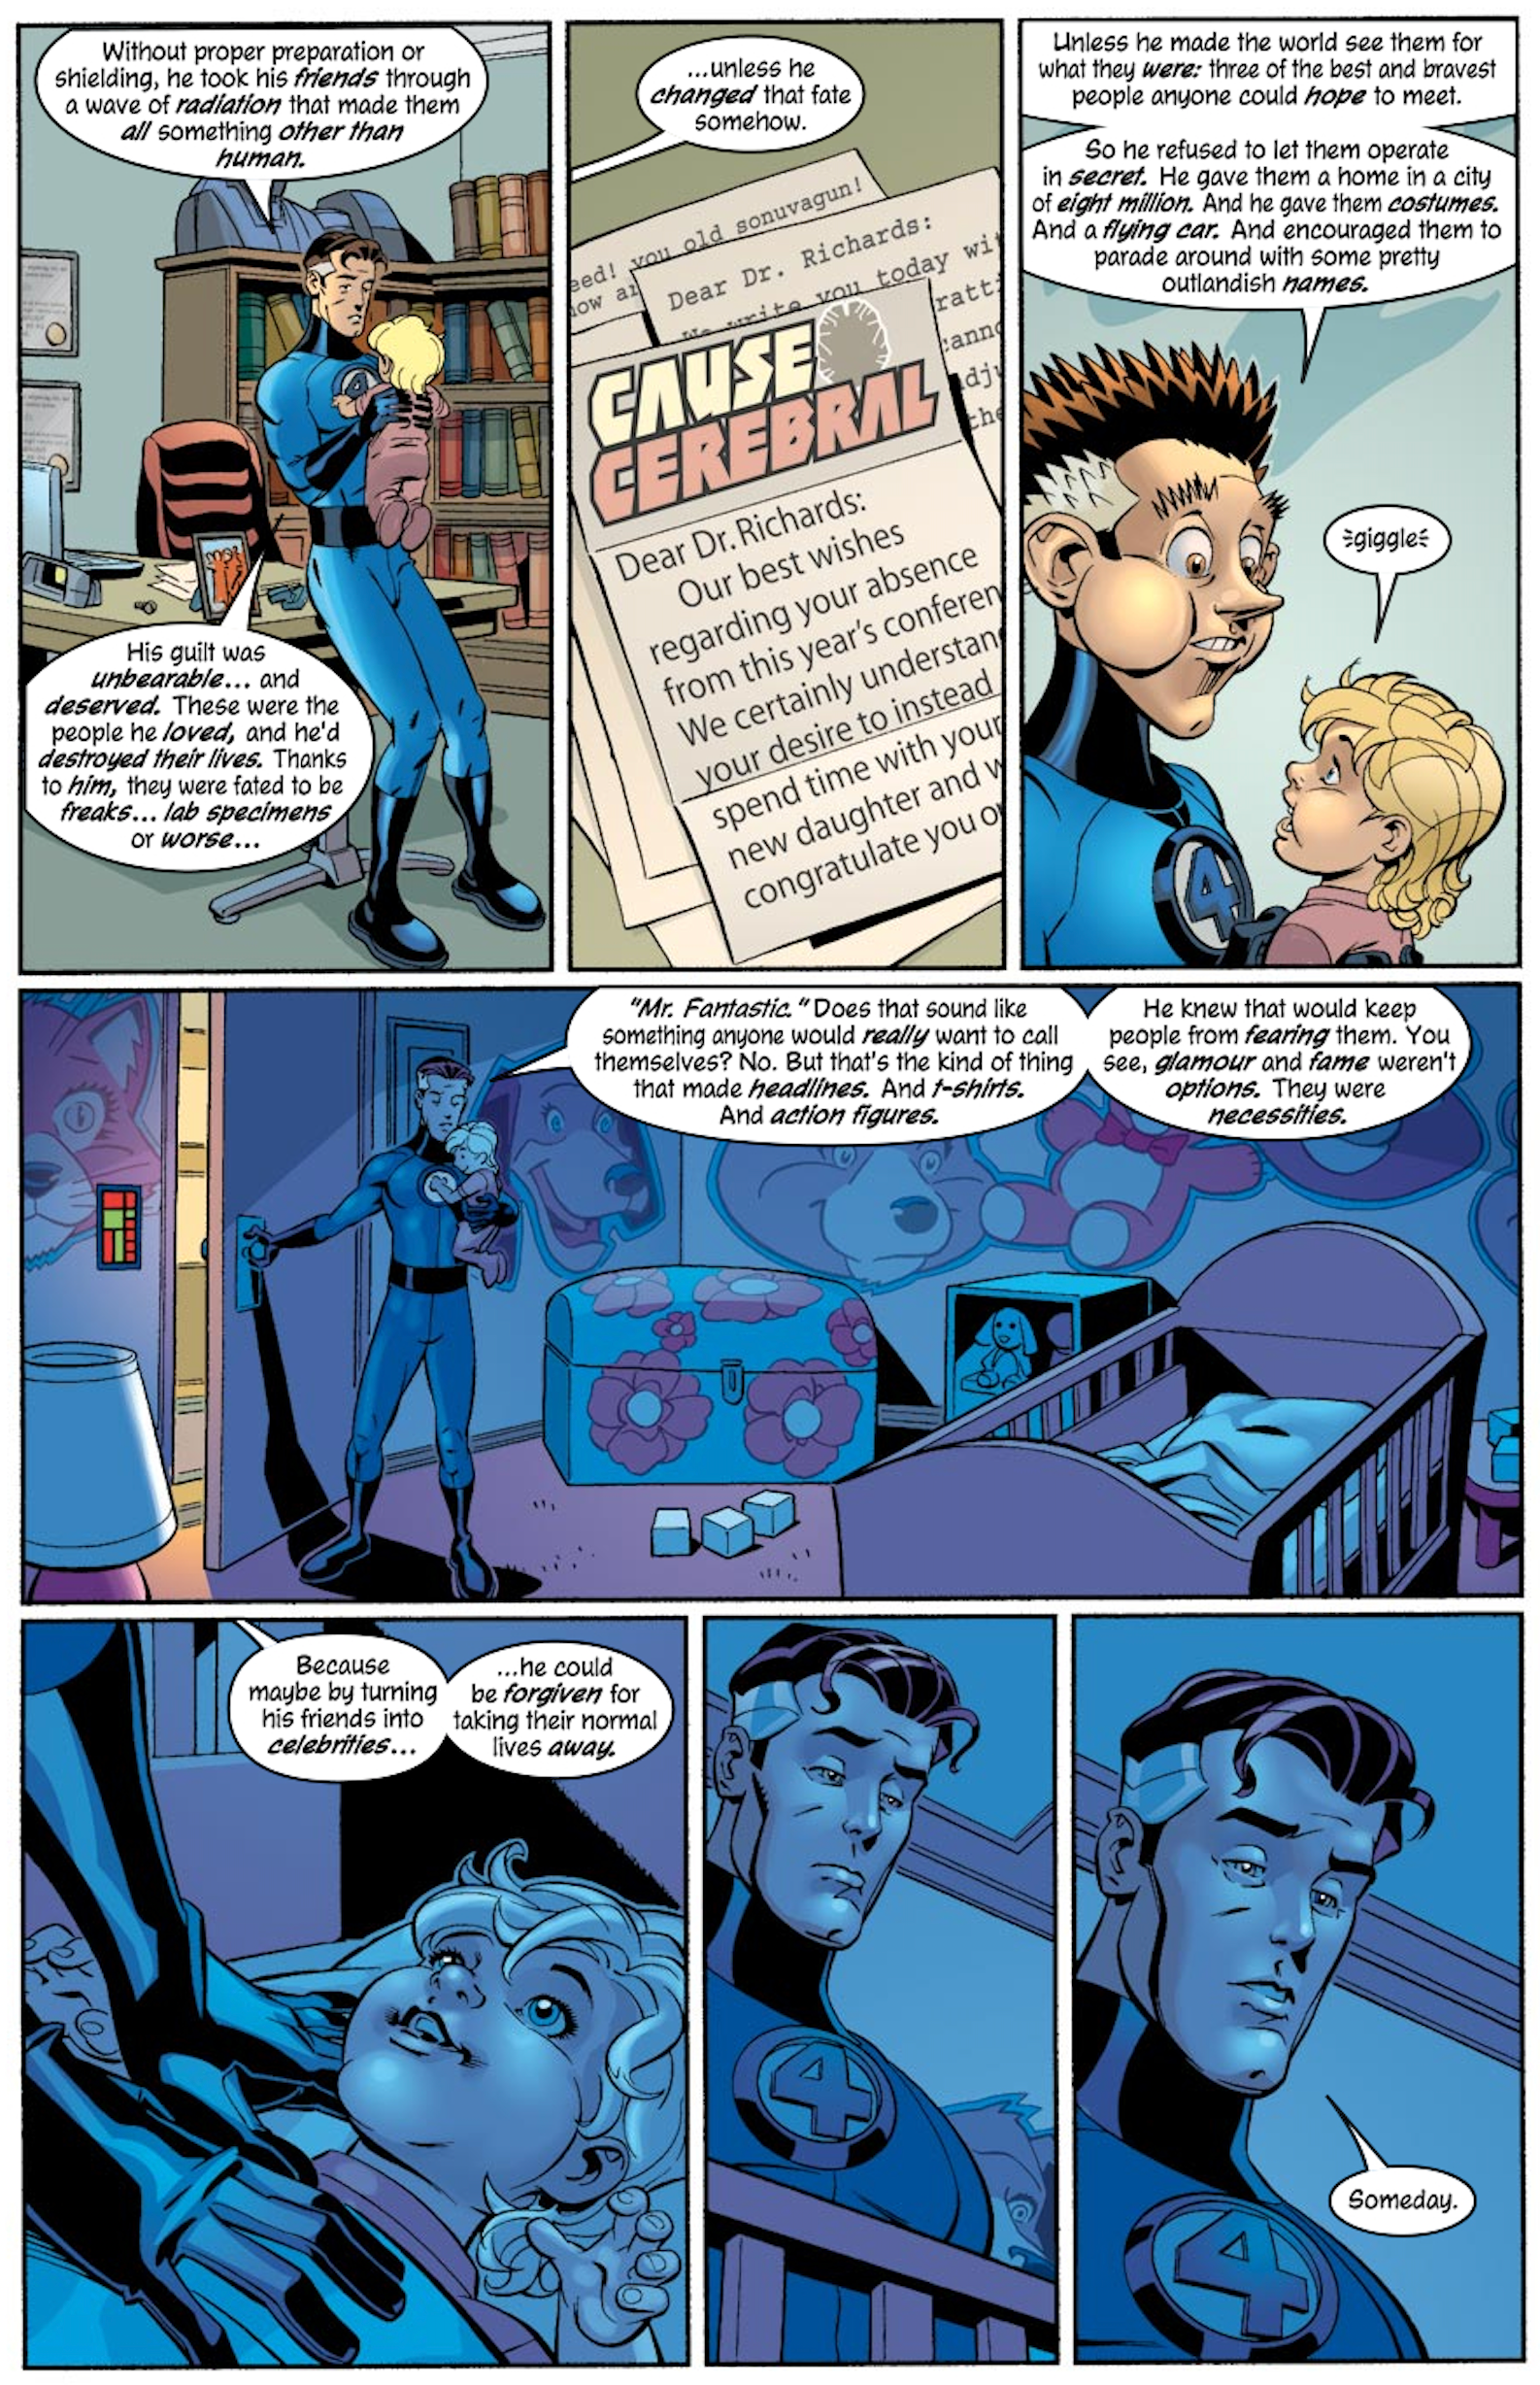 Why Reed Richards is Mr Fantastic